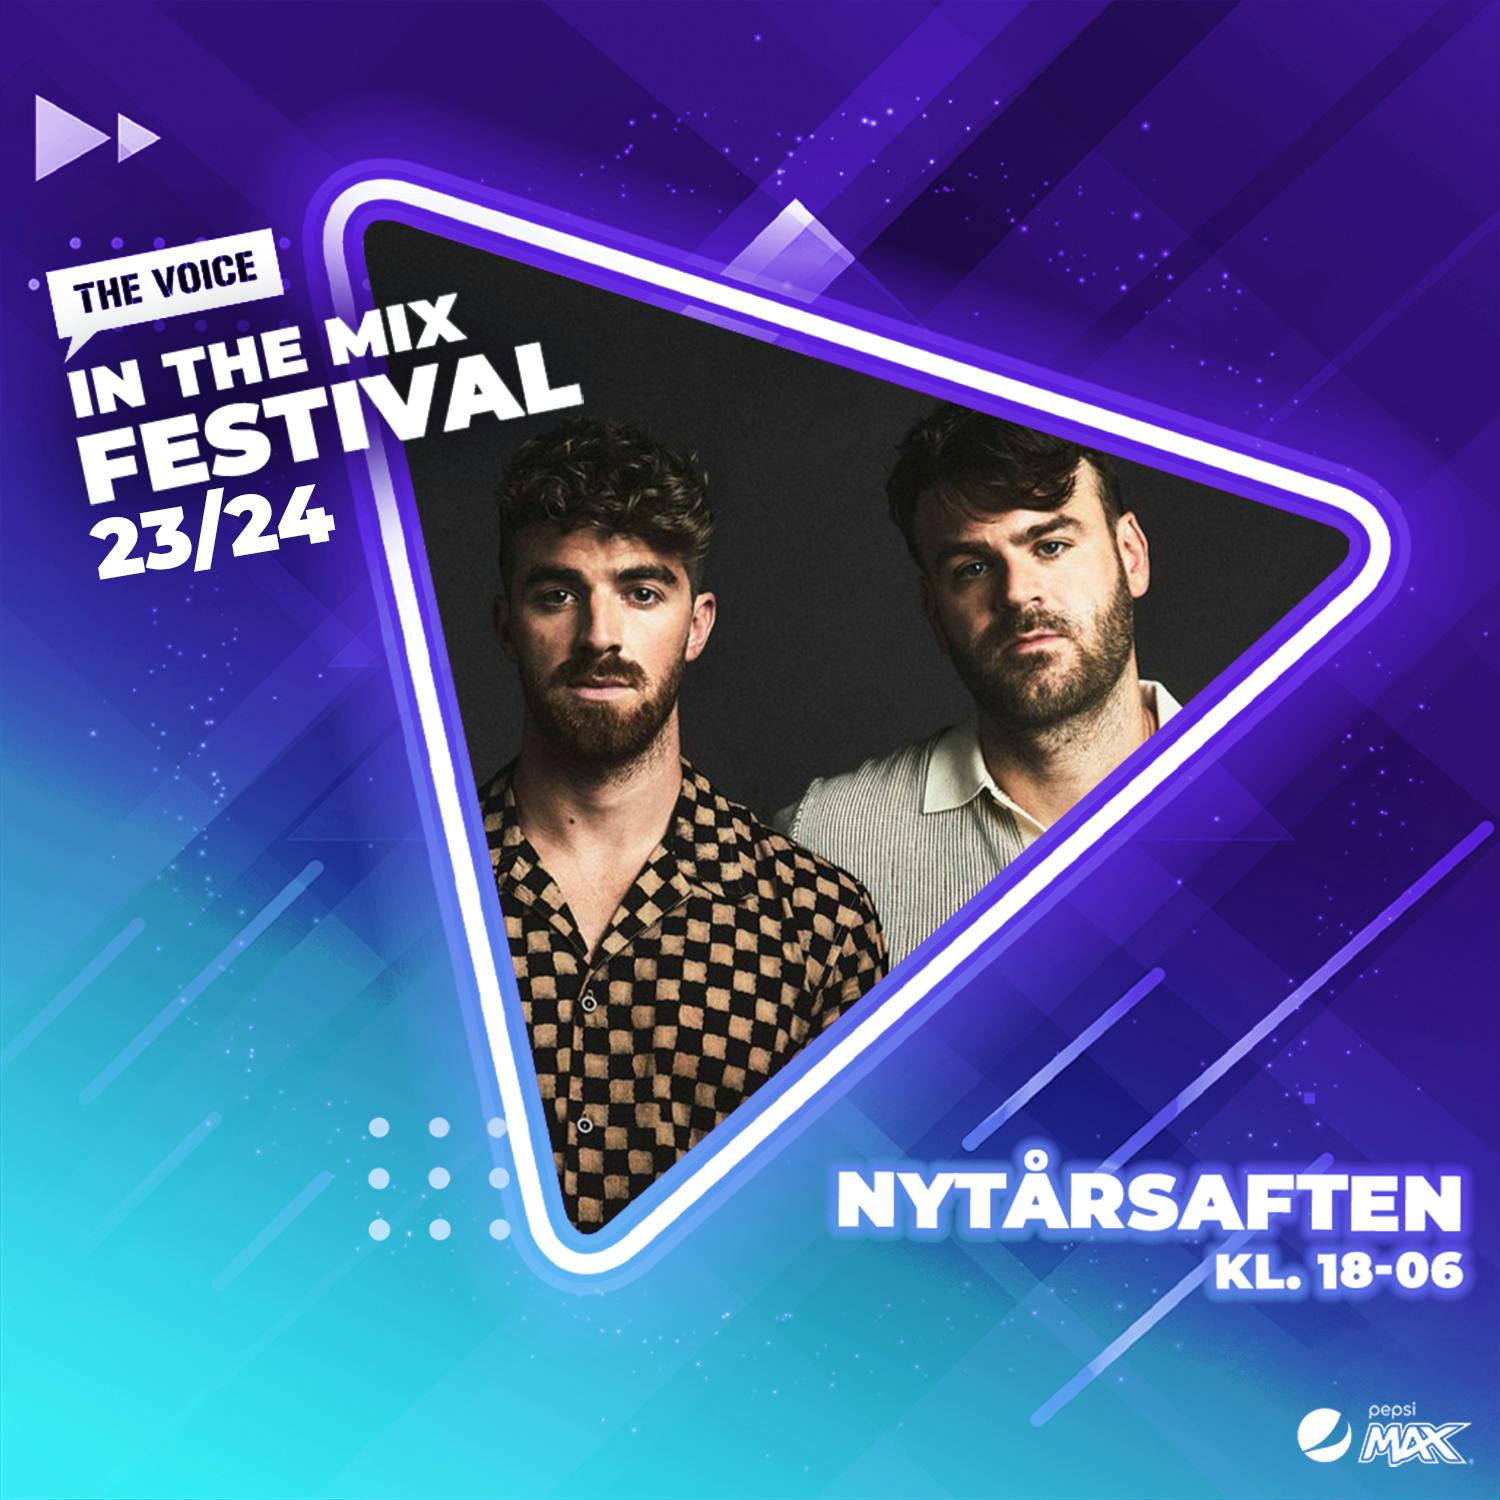 The Chainsmokers - The Voice In The Mix Festival 23/24